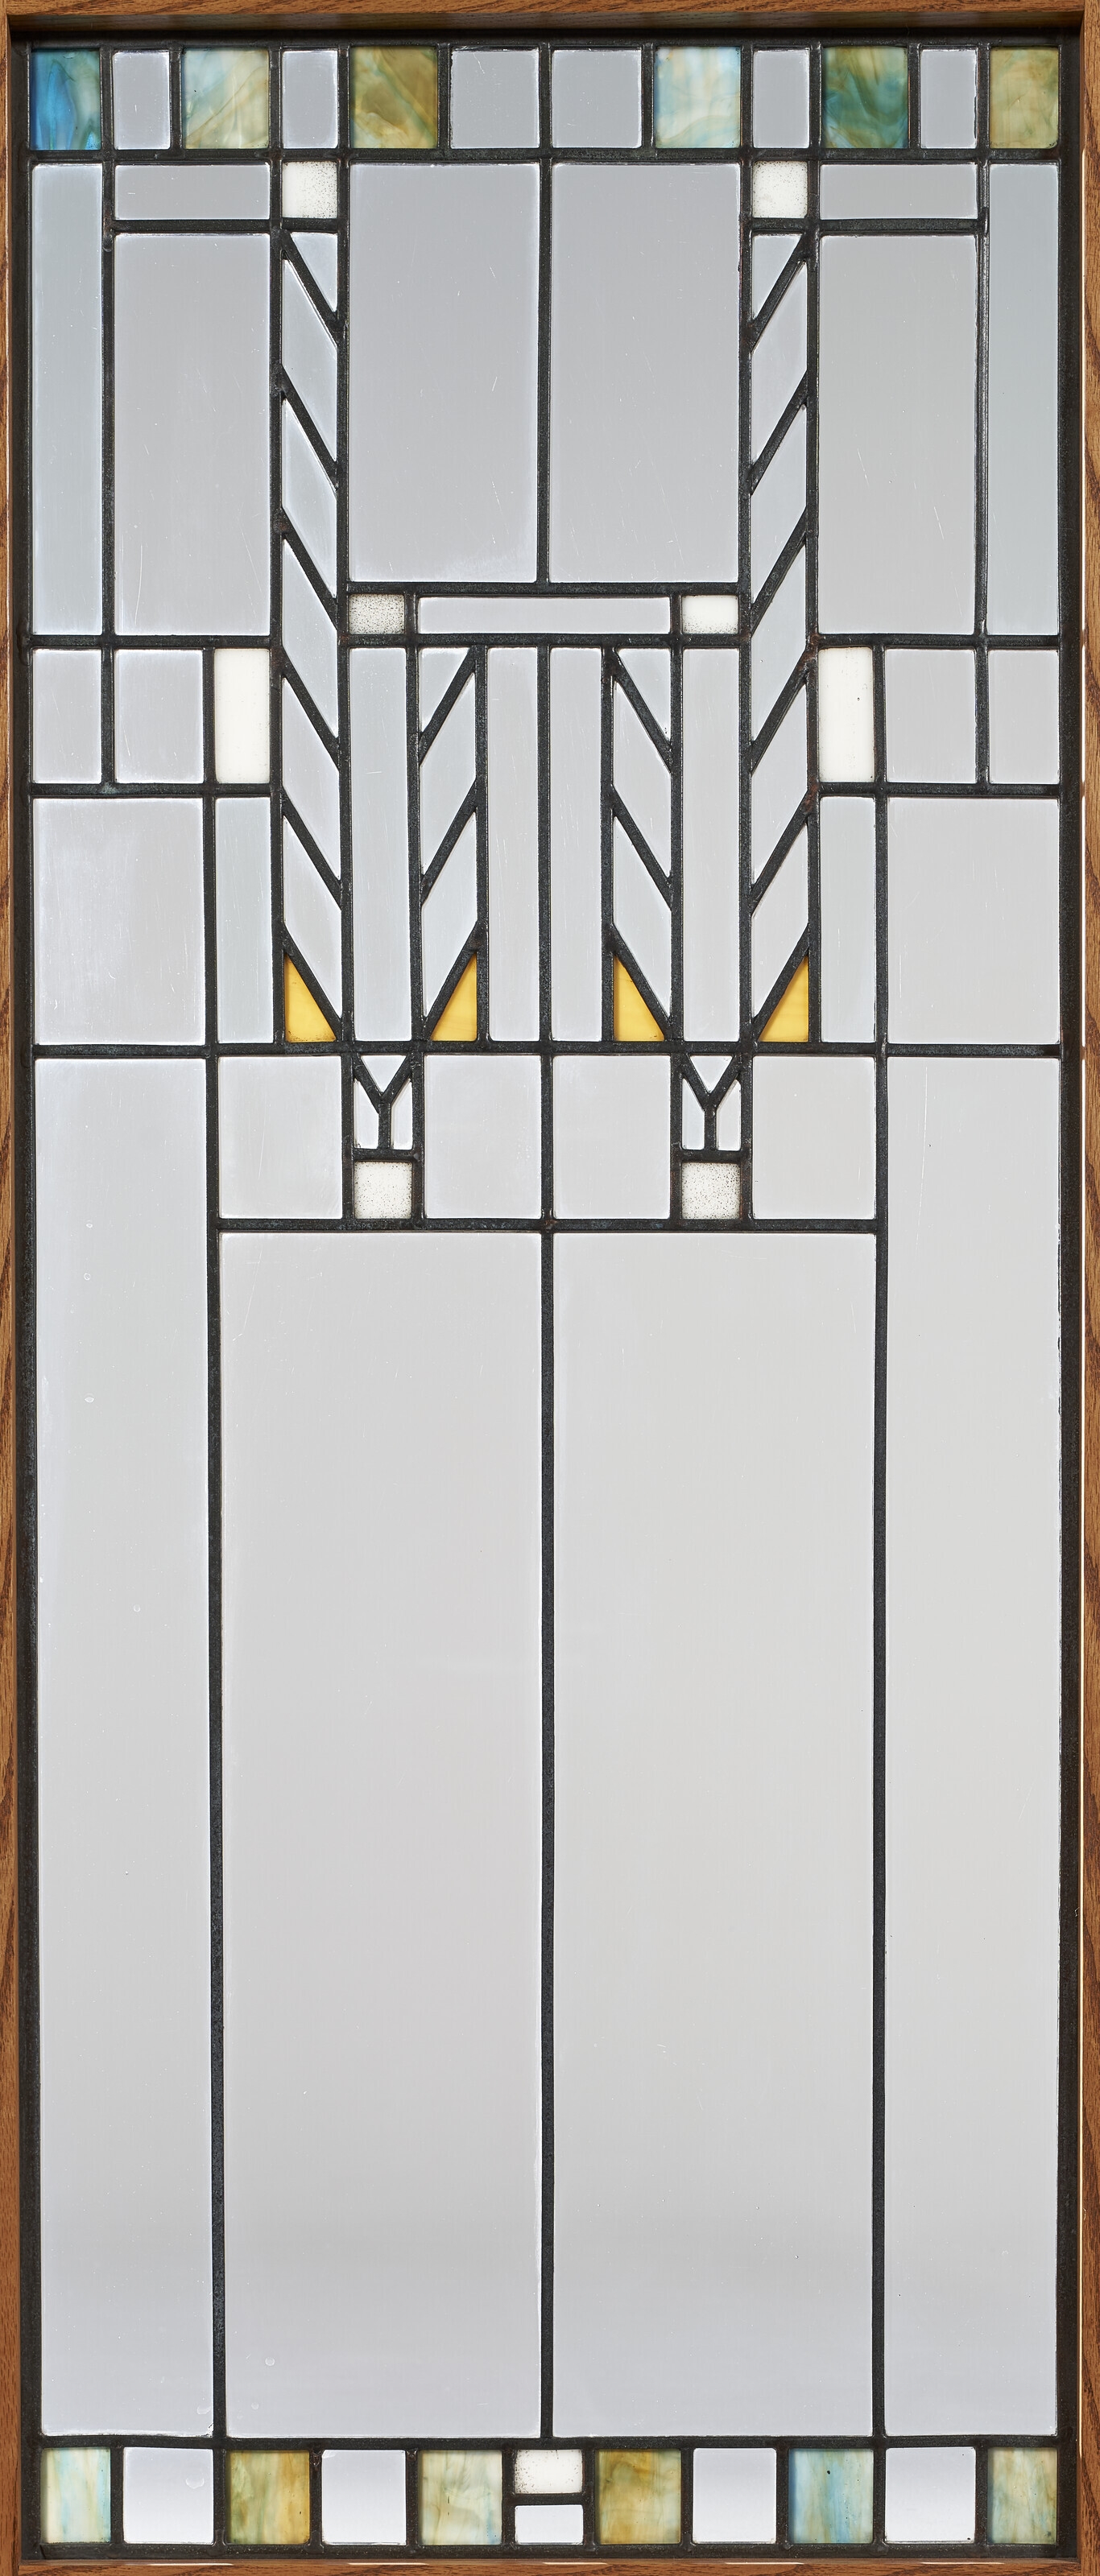 WINDOW FROM THE MEYER MAY HOUSE, GRAND RAPIDS, MICHIGAN by Frank Lloyd Wright, designed circa 1908